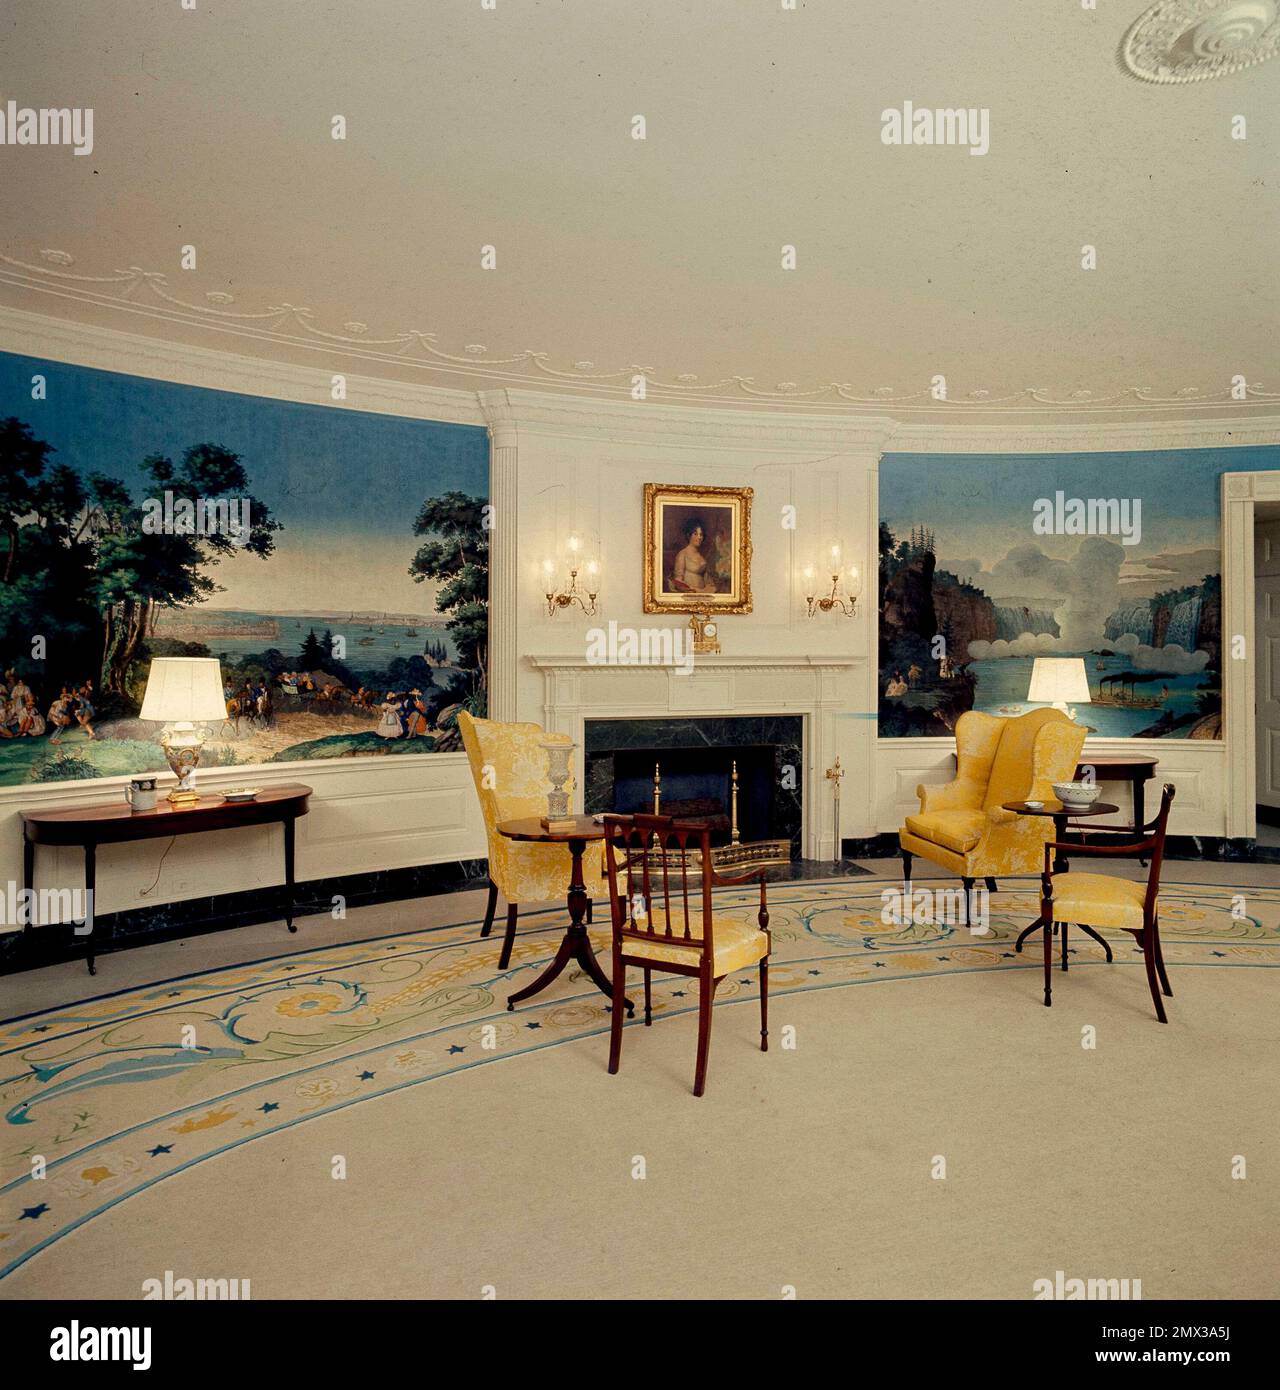 https://c8.alamy.com/comp/2MX3A5J/the-diplomatic-reception-room-recently-refurbished-with-its-scenic-america-wallpaper-is-shown-at-the-white-house-on-oct-6-1961-the-president-meets-with-foreign-diplomats-in-the-room-who-are-presenting-their-credentials-the-wallpaper-was-recovered-from-a-razed-building-in-maryland-the-furniture-is-from-the-early-19th-century-ap-photohenry-burroughs-2MX3A5J.jpg